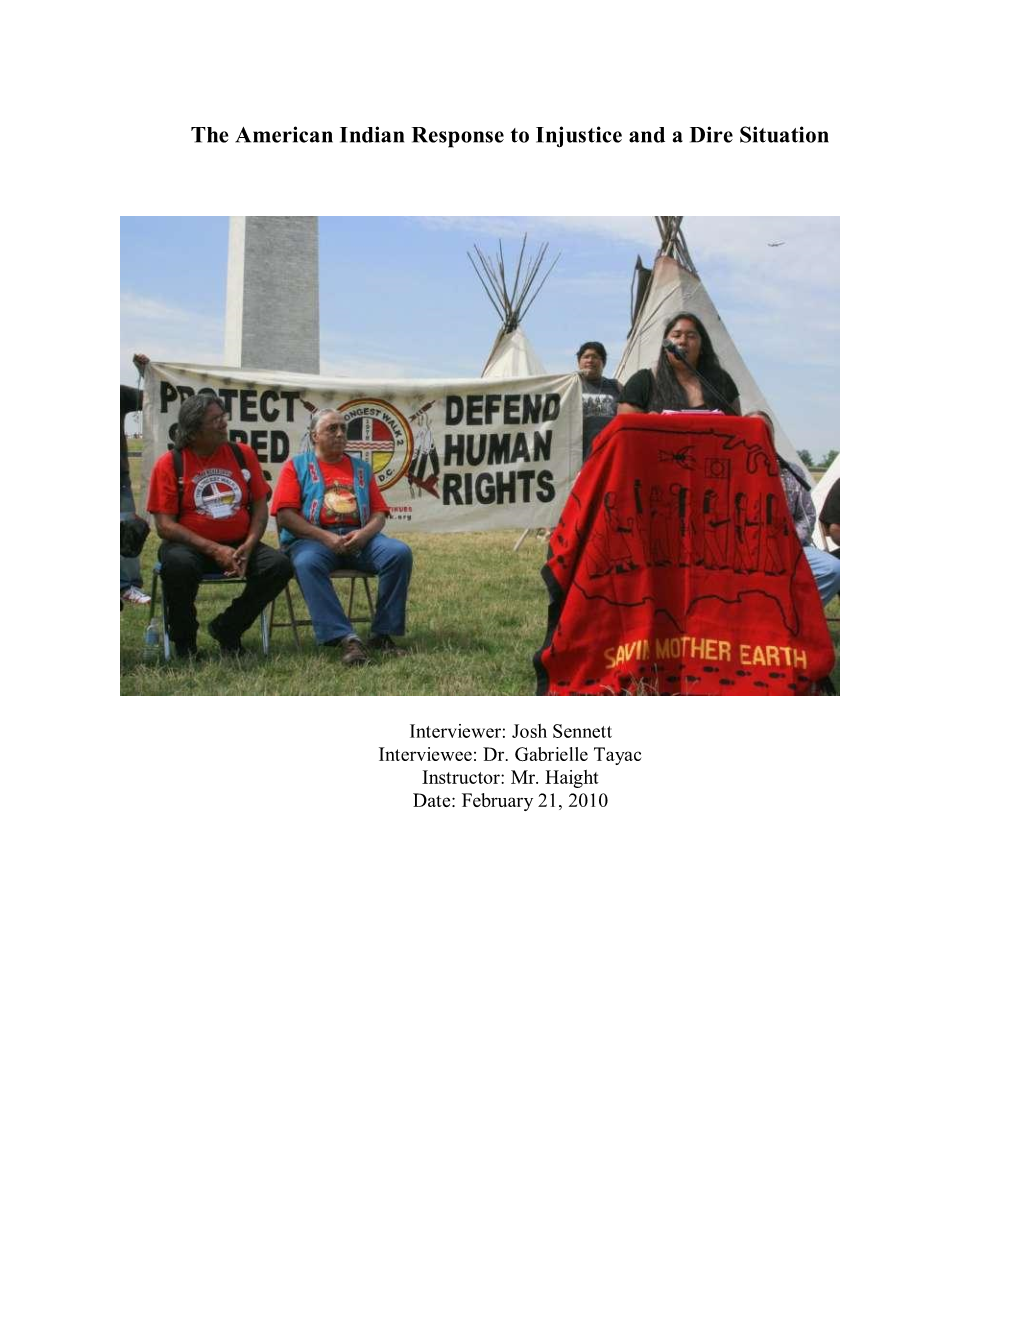 The American Indian Response to Injustice and a Dire Situation